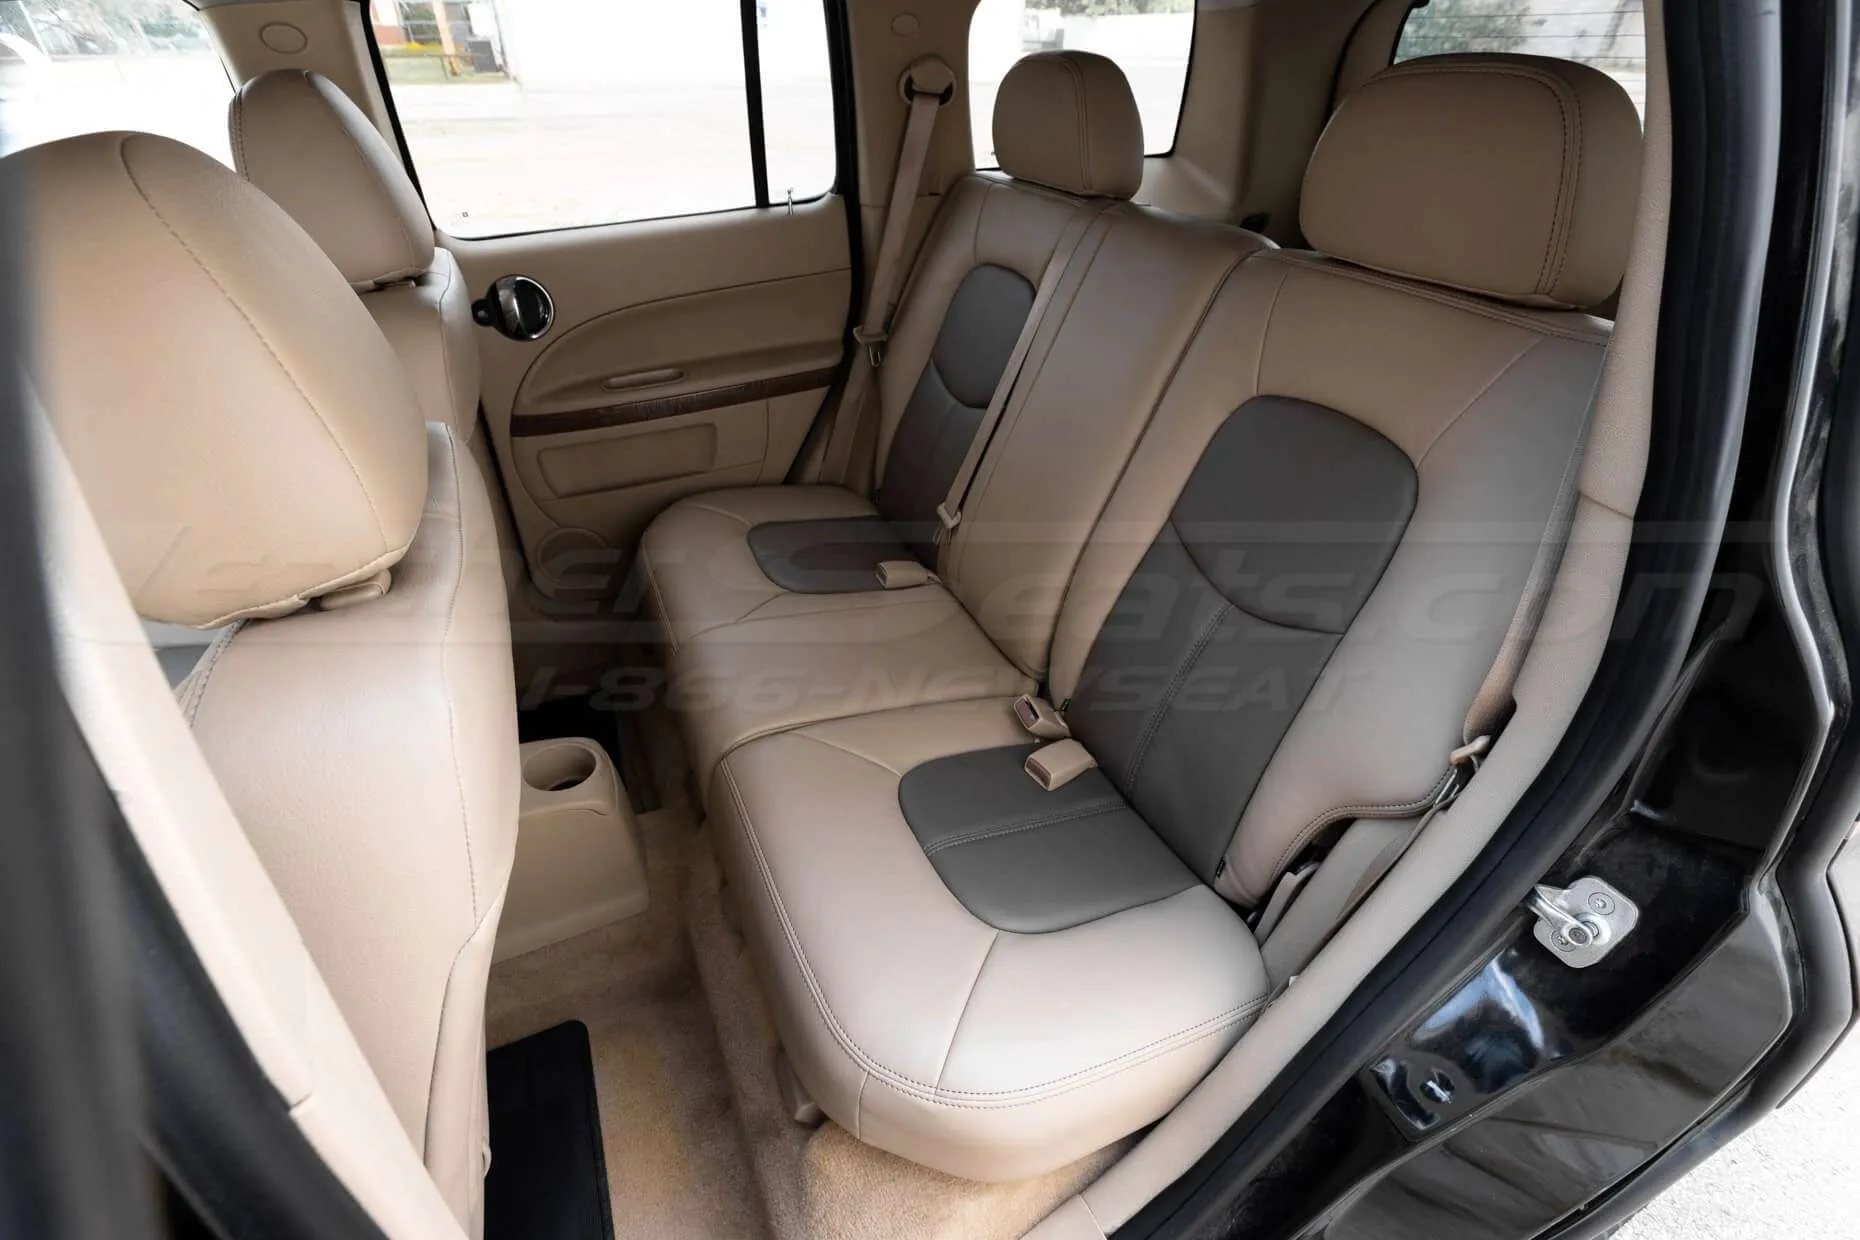 2006-2011 Chevrolet HHR Custom leather seats in Sandstone and Driftwood